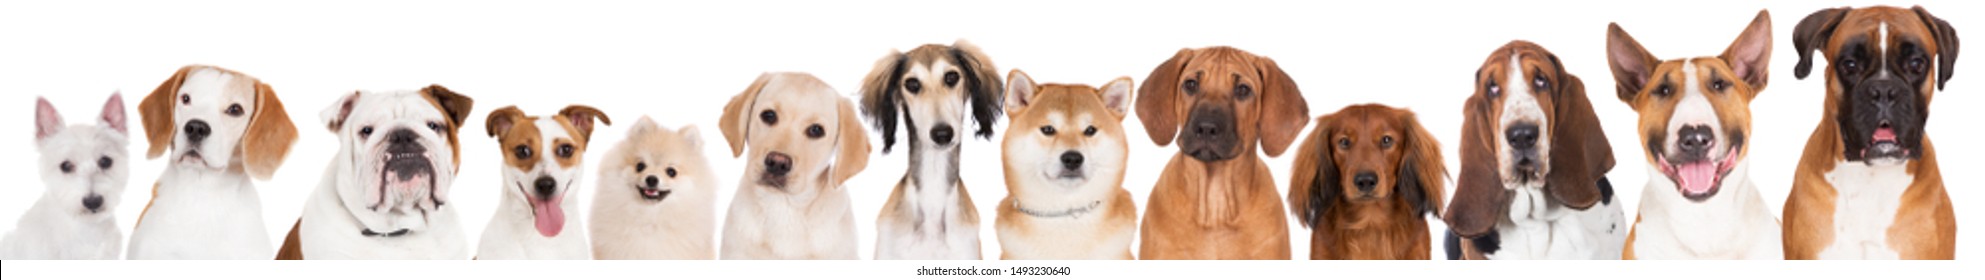 red and white dogs portraits lined up in a row on white - Shutterstock ID 1493230640